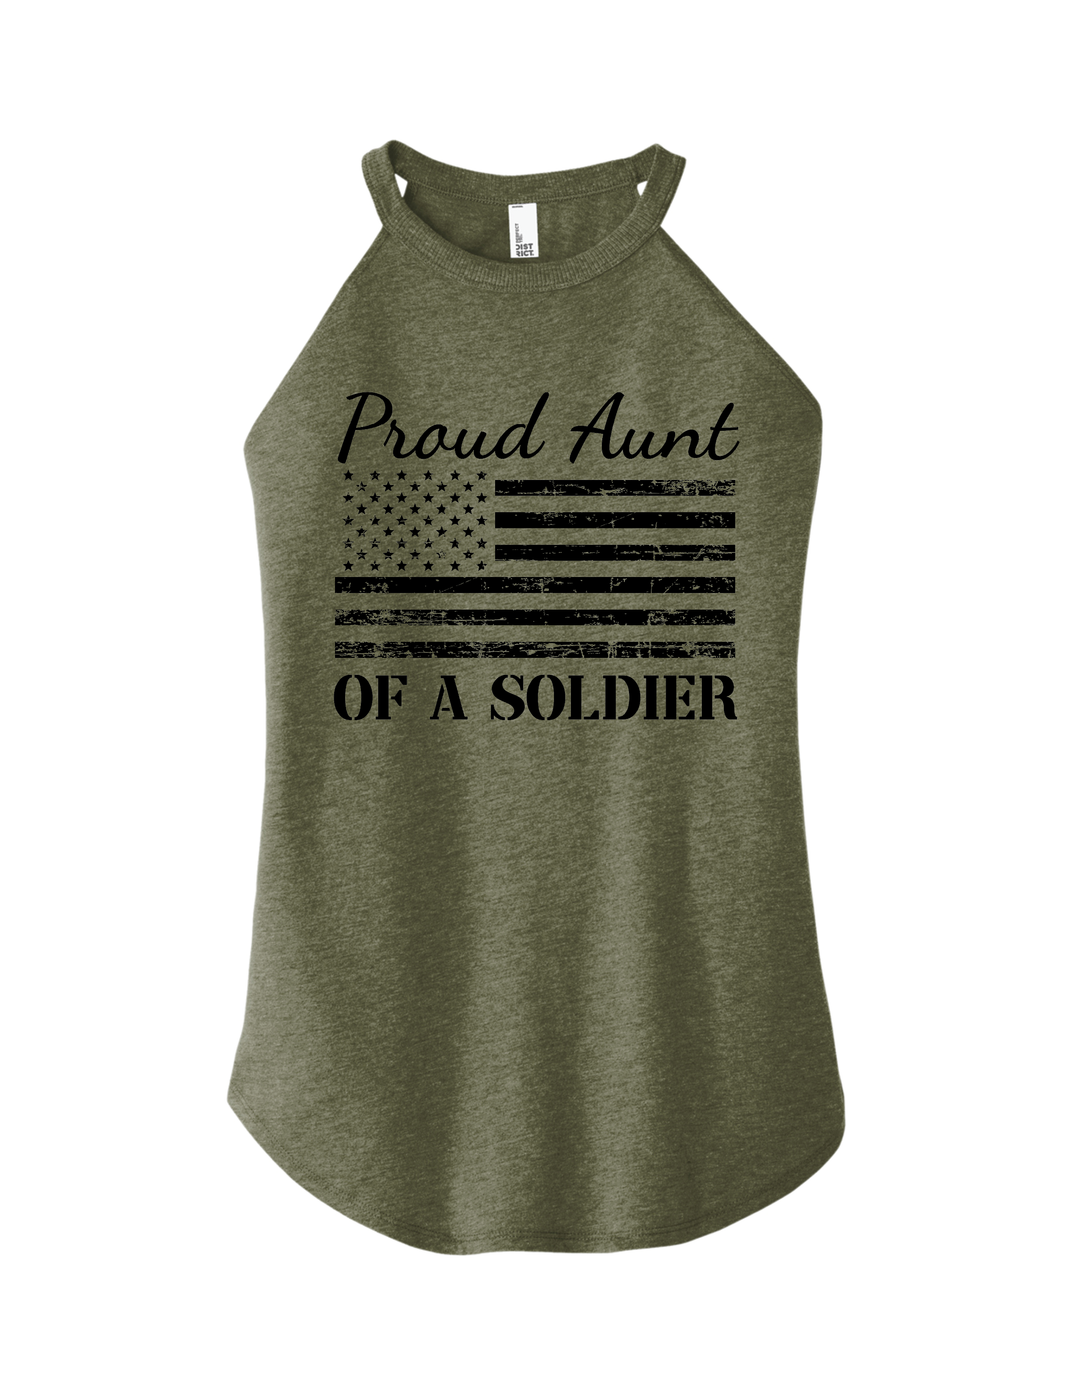 Proud Aunt of a Soldier Tank (Green)